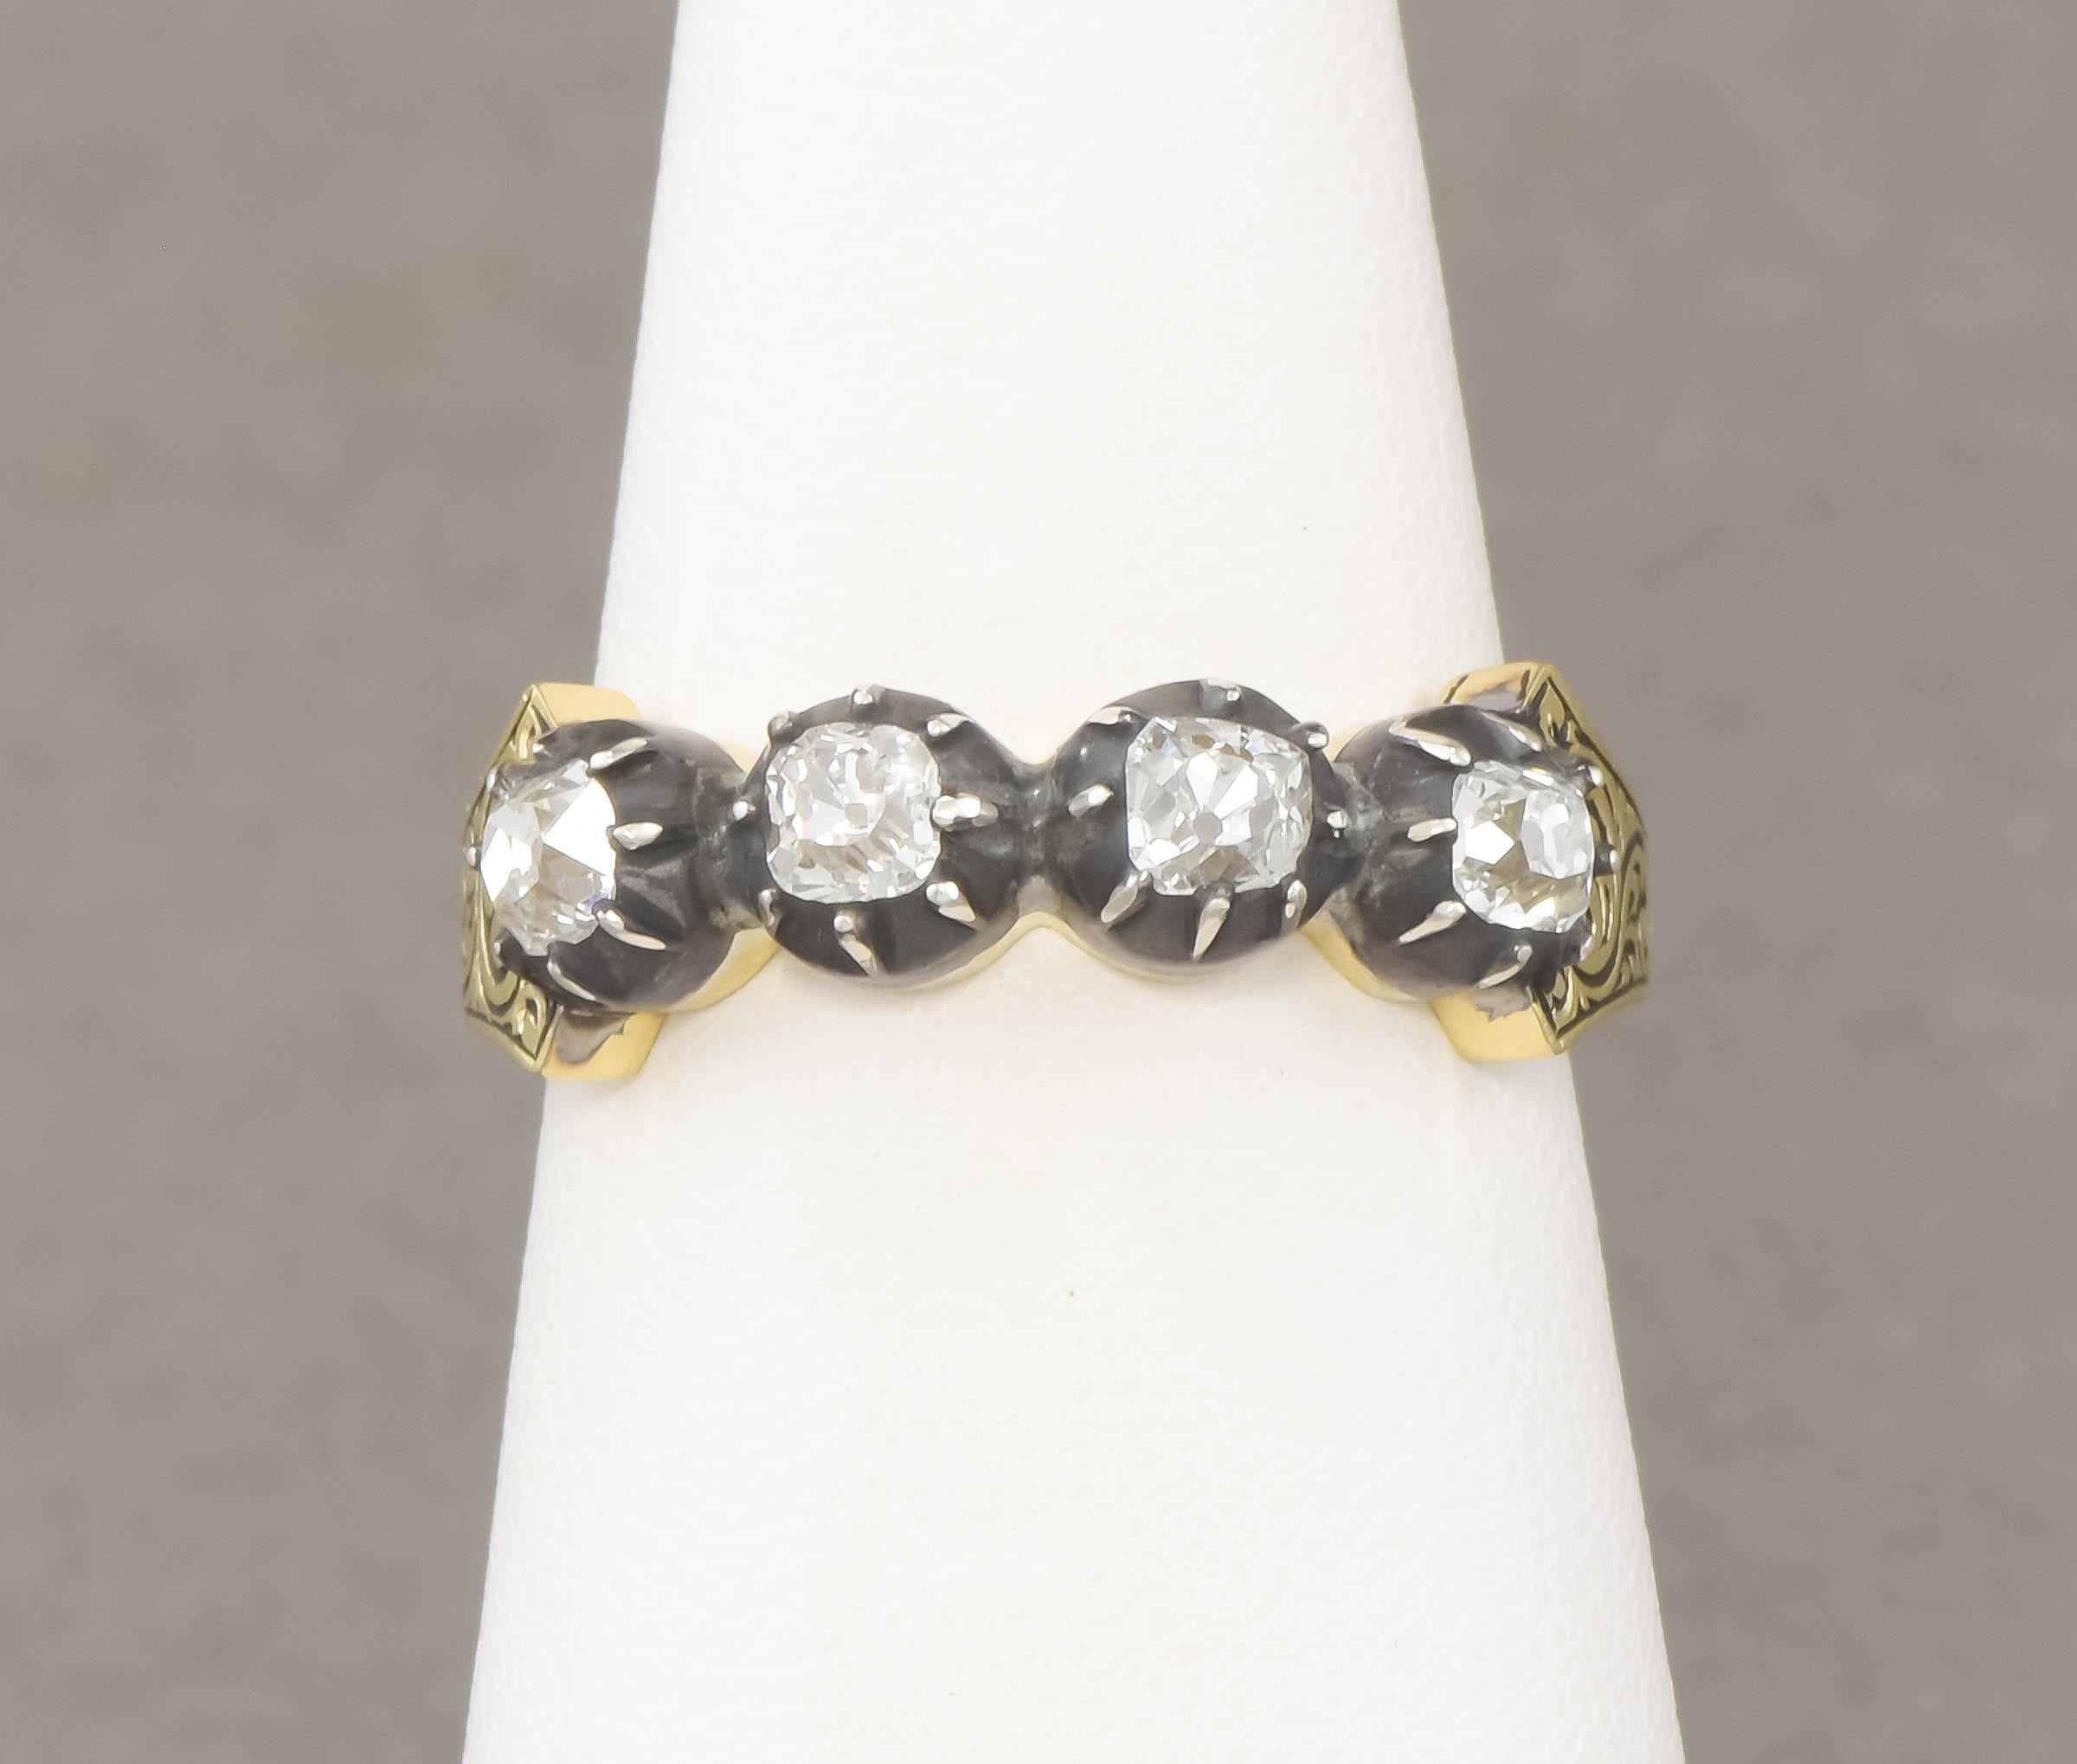 This is one of two beautiful Georgian style diamond bands I've created using Georgian period old mine cut/peruzzi cut diamonds from a damaged antique French brooch.  (a solitaire ring that looks amazing paired with this band is also available, and